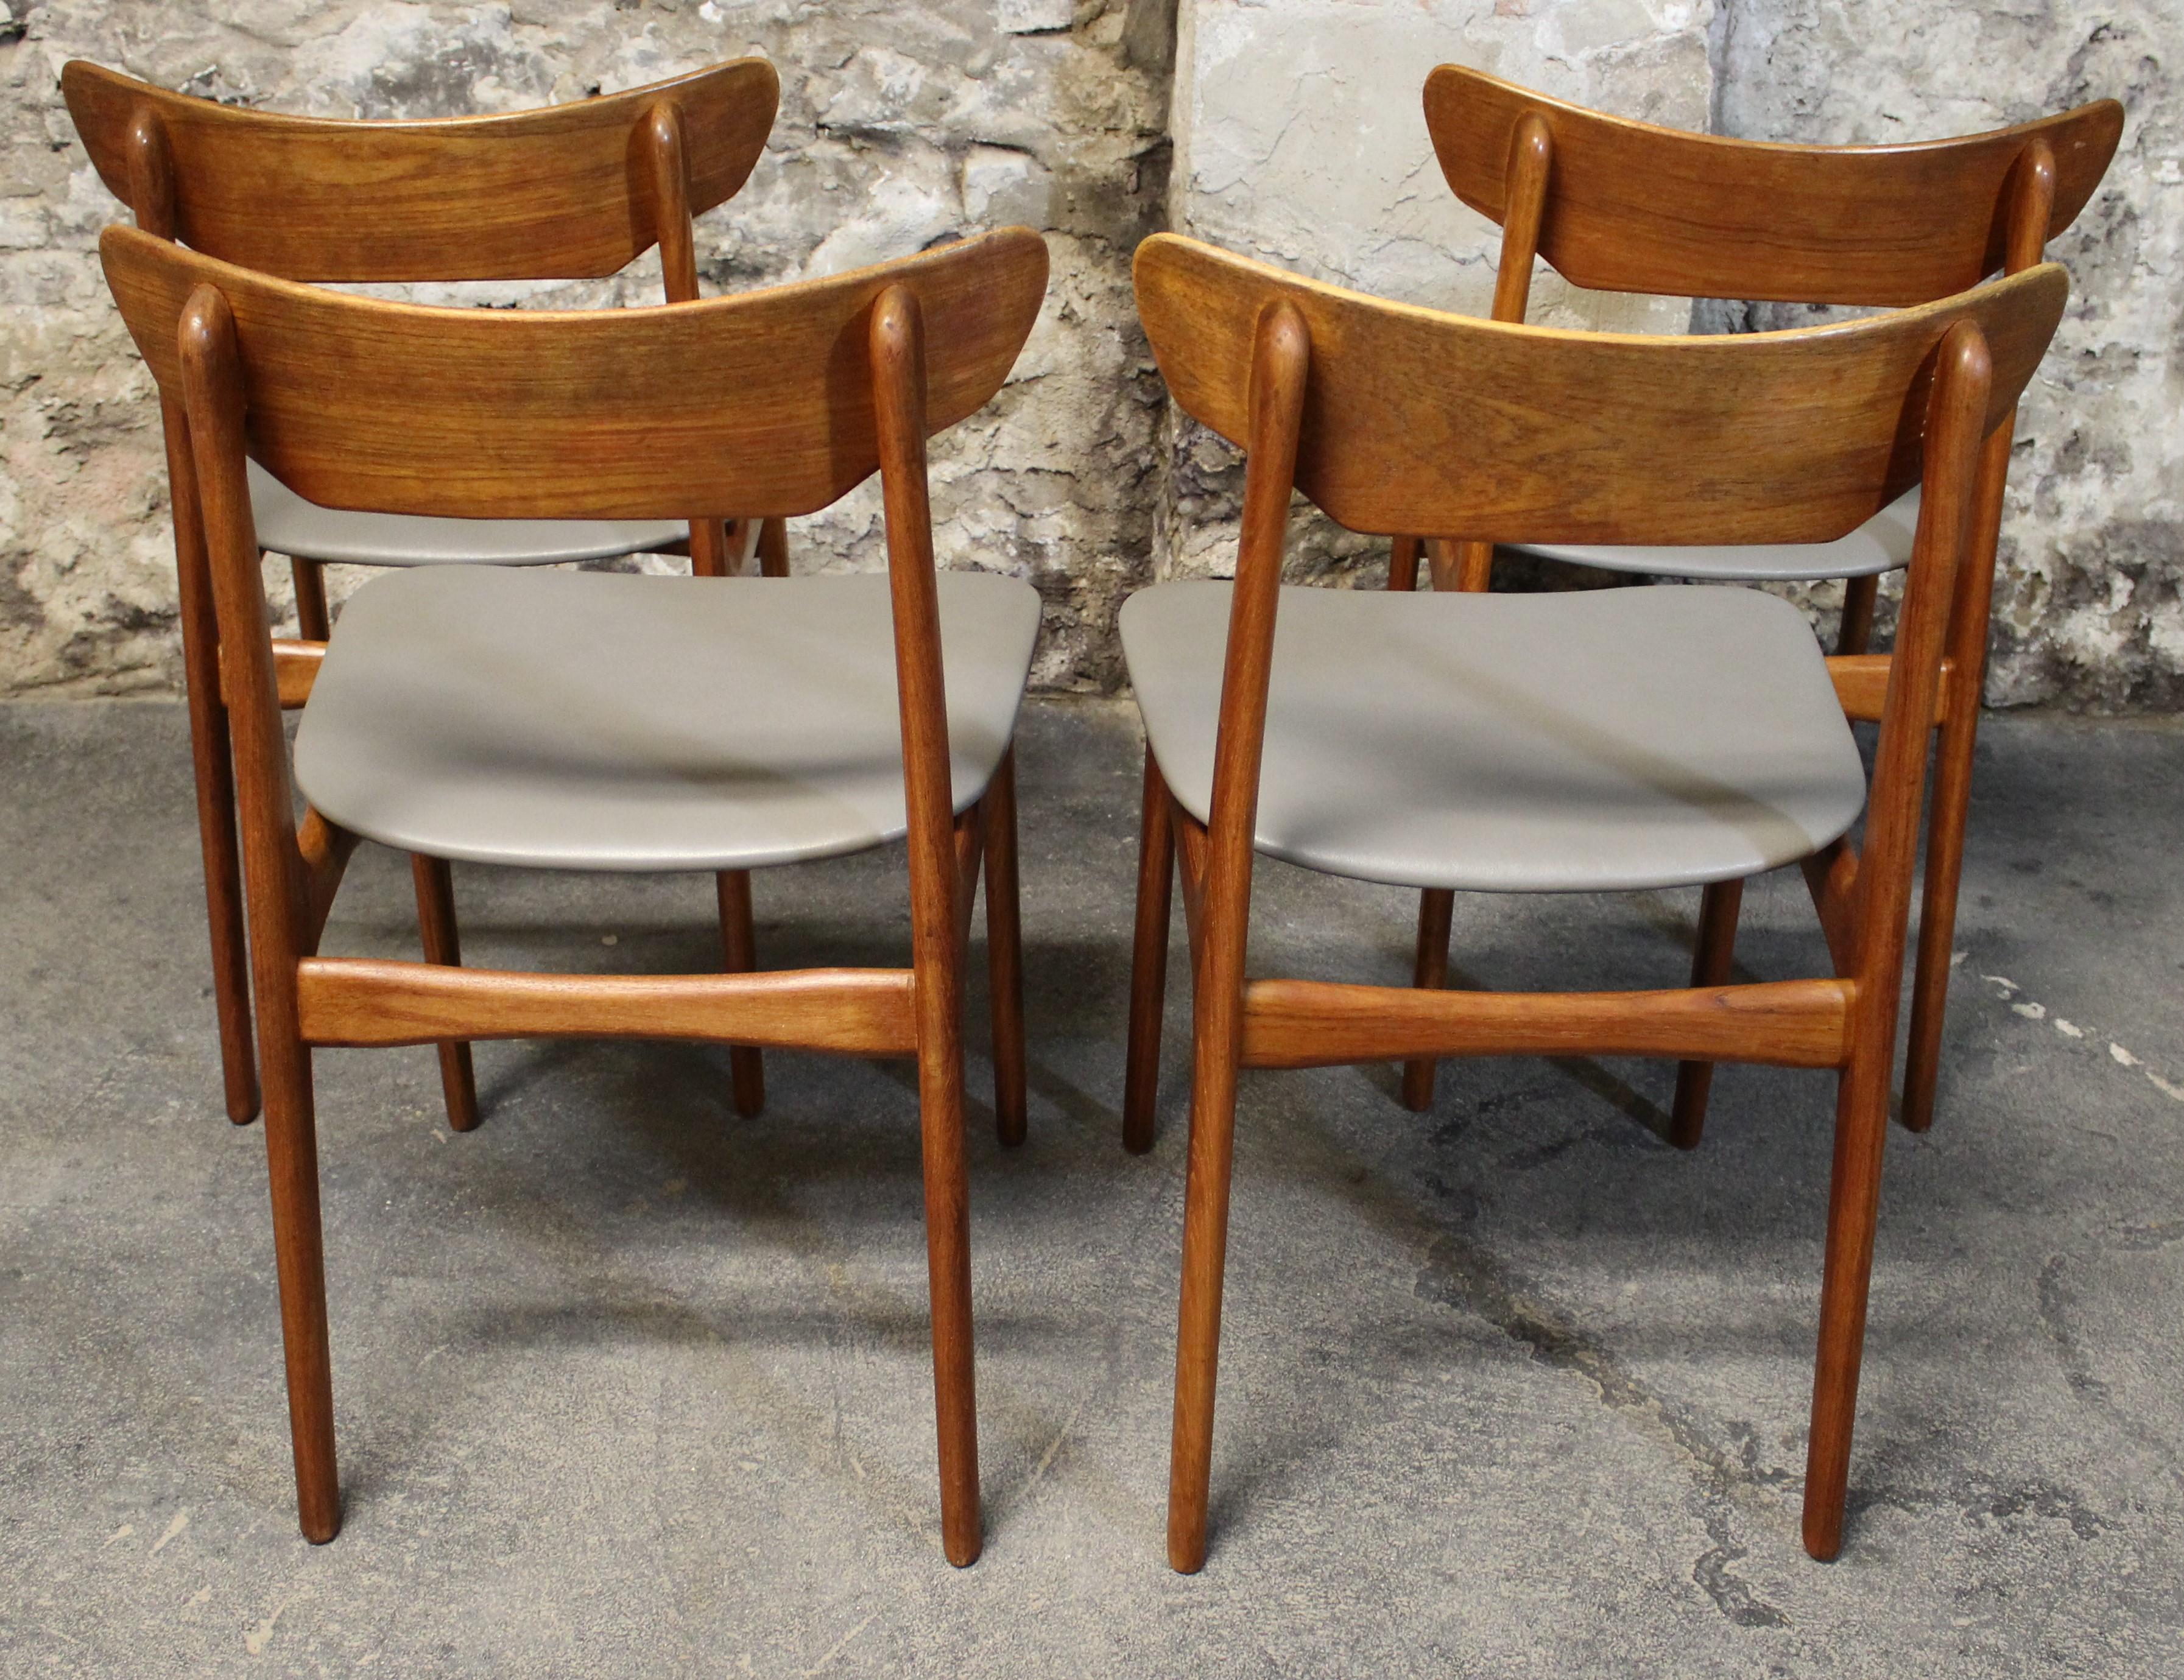 Four Danish Teak Dining Chairs by Schionning and Elgaard for Randers 1